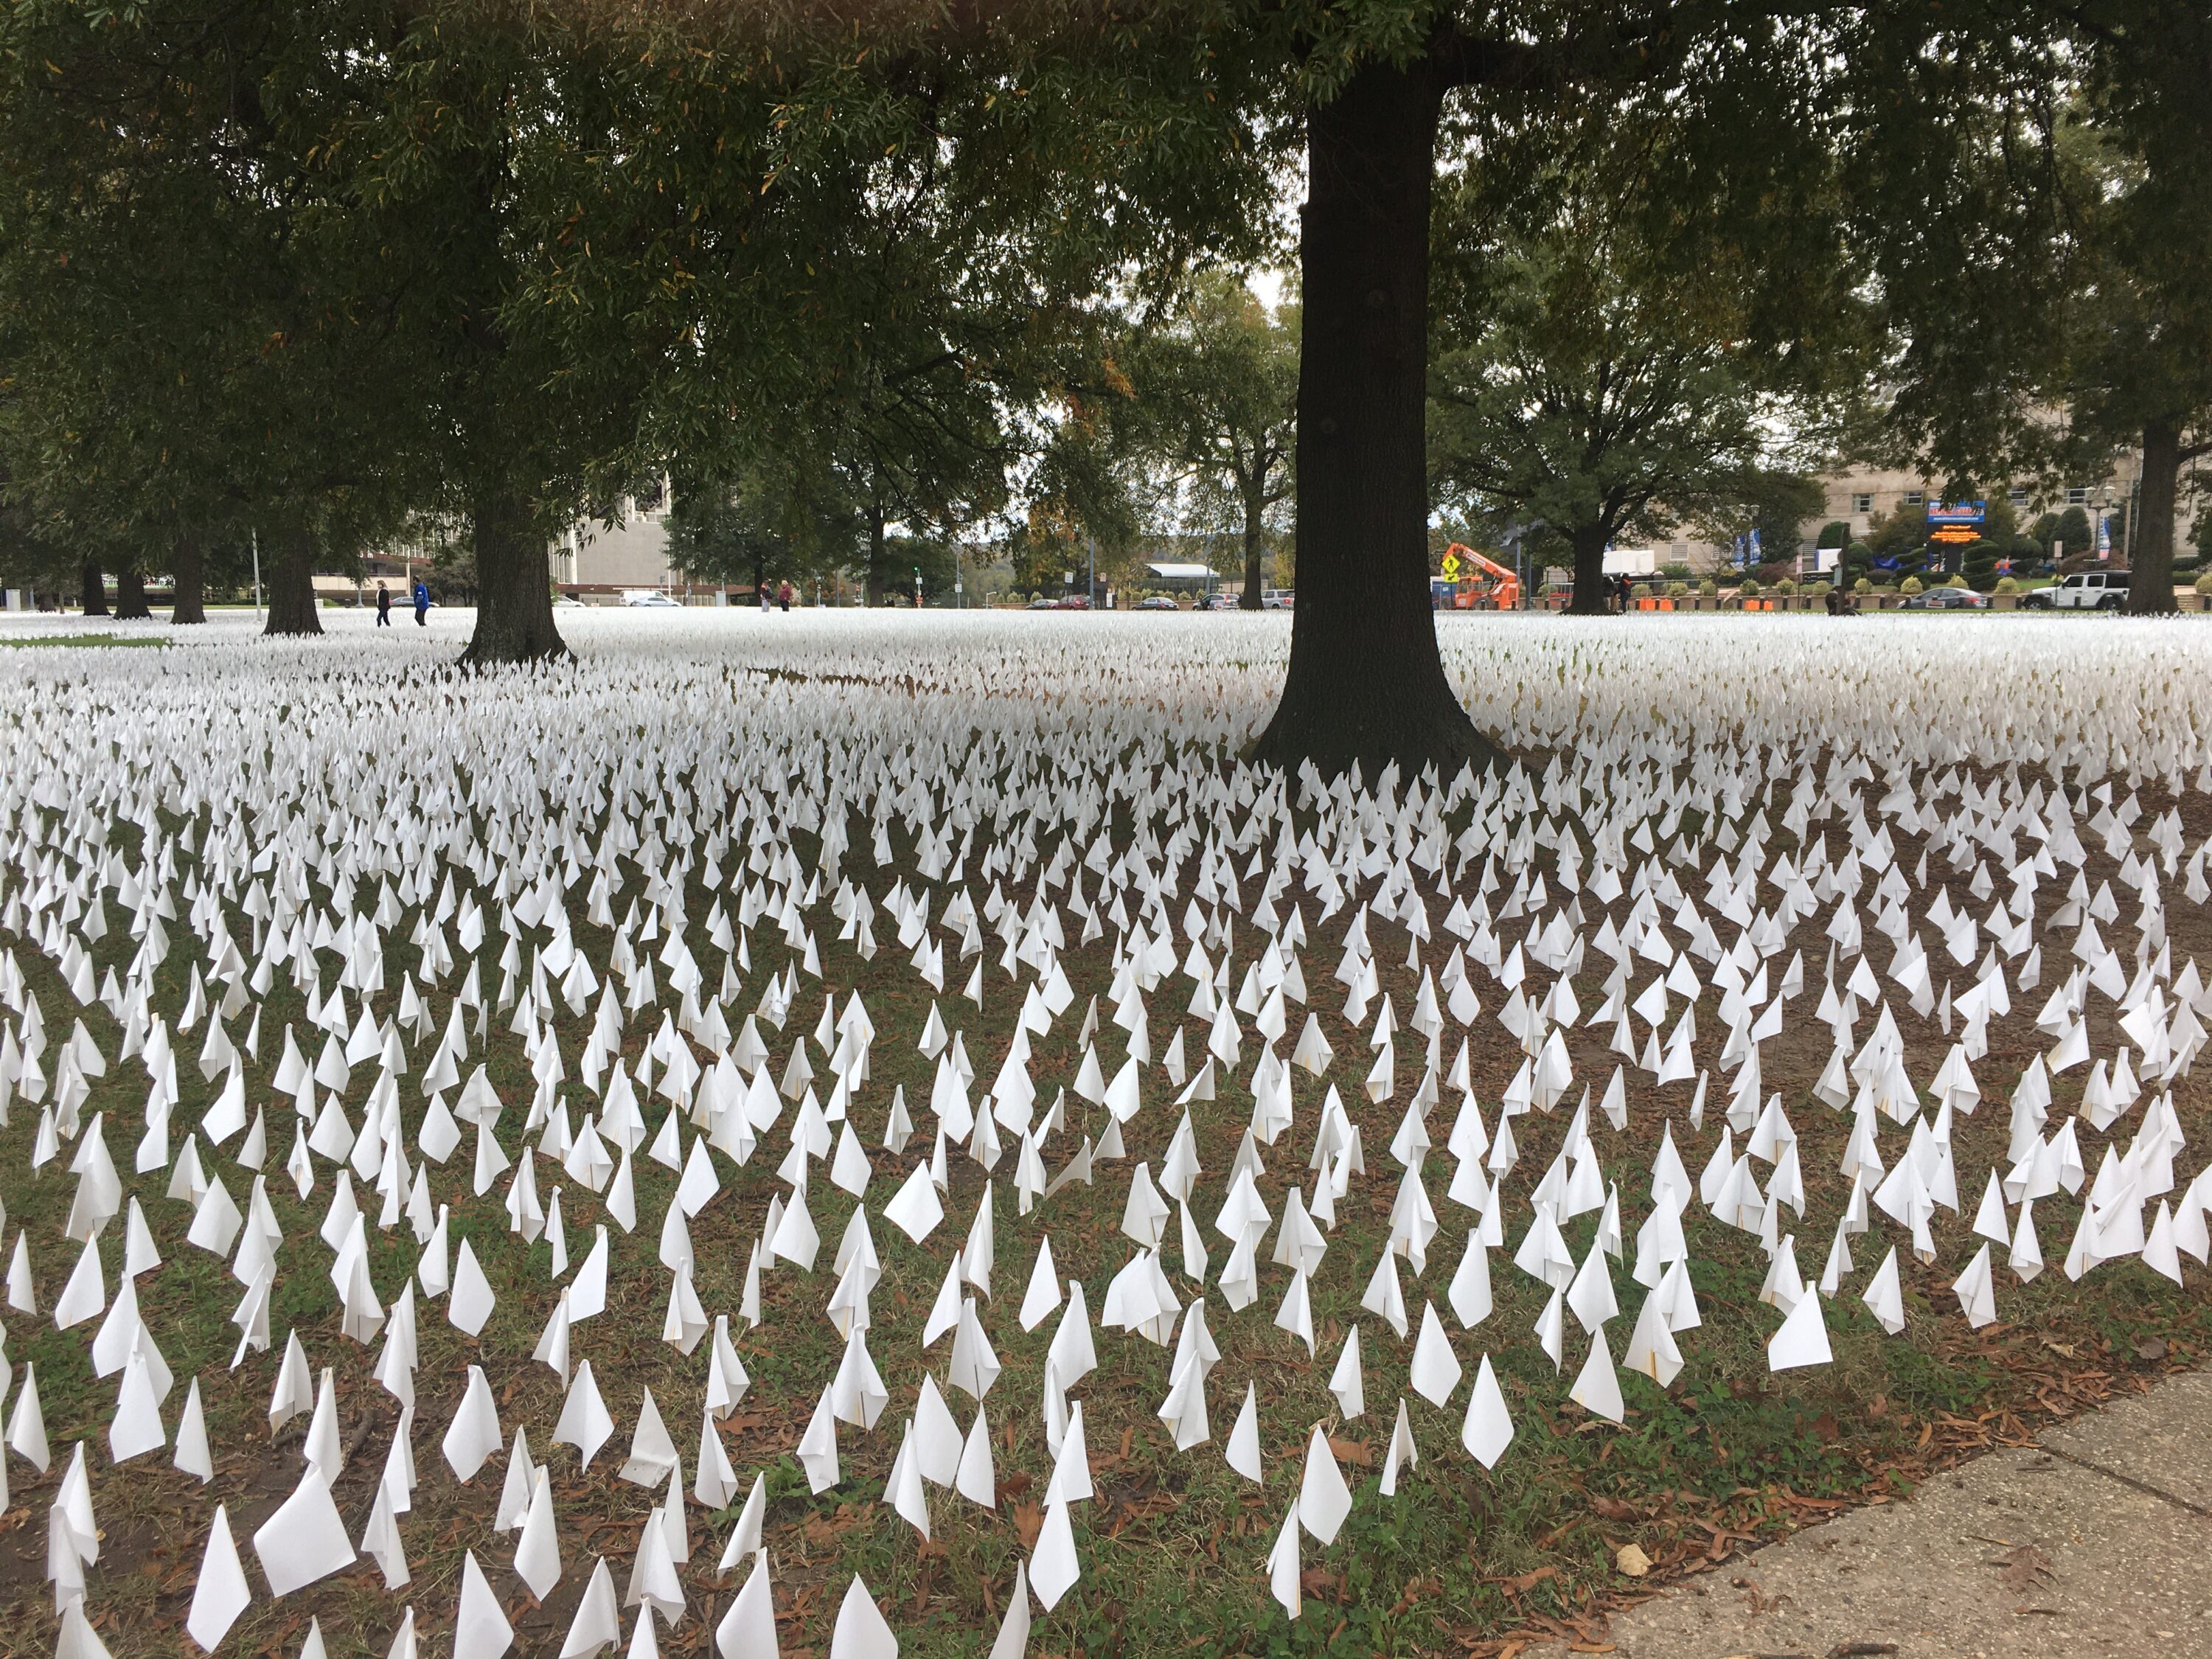 Thousands of small white flags dot the grounds of a grassy public space, a line of large trees break the thousands of flags.